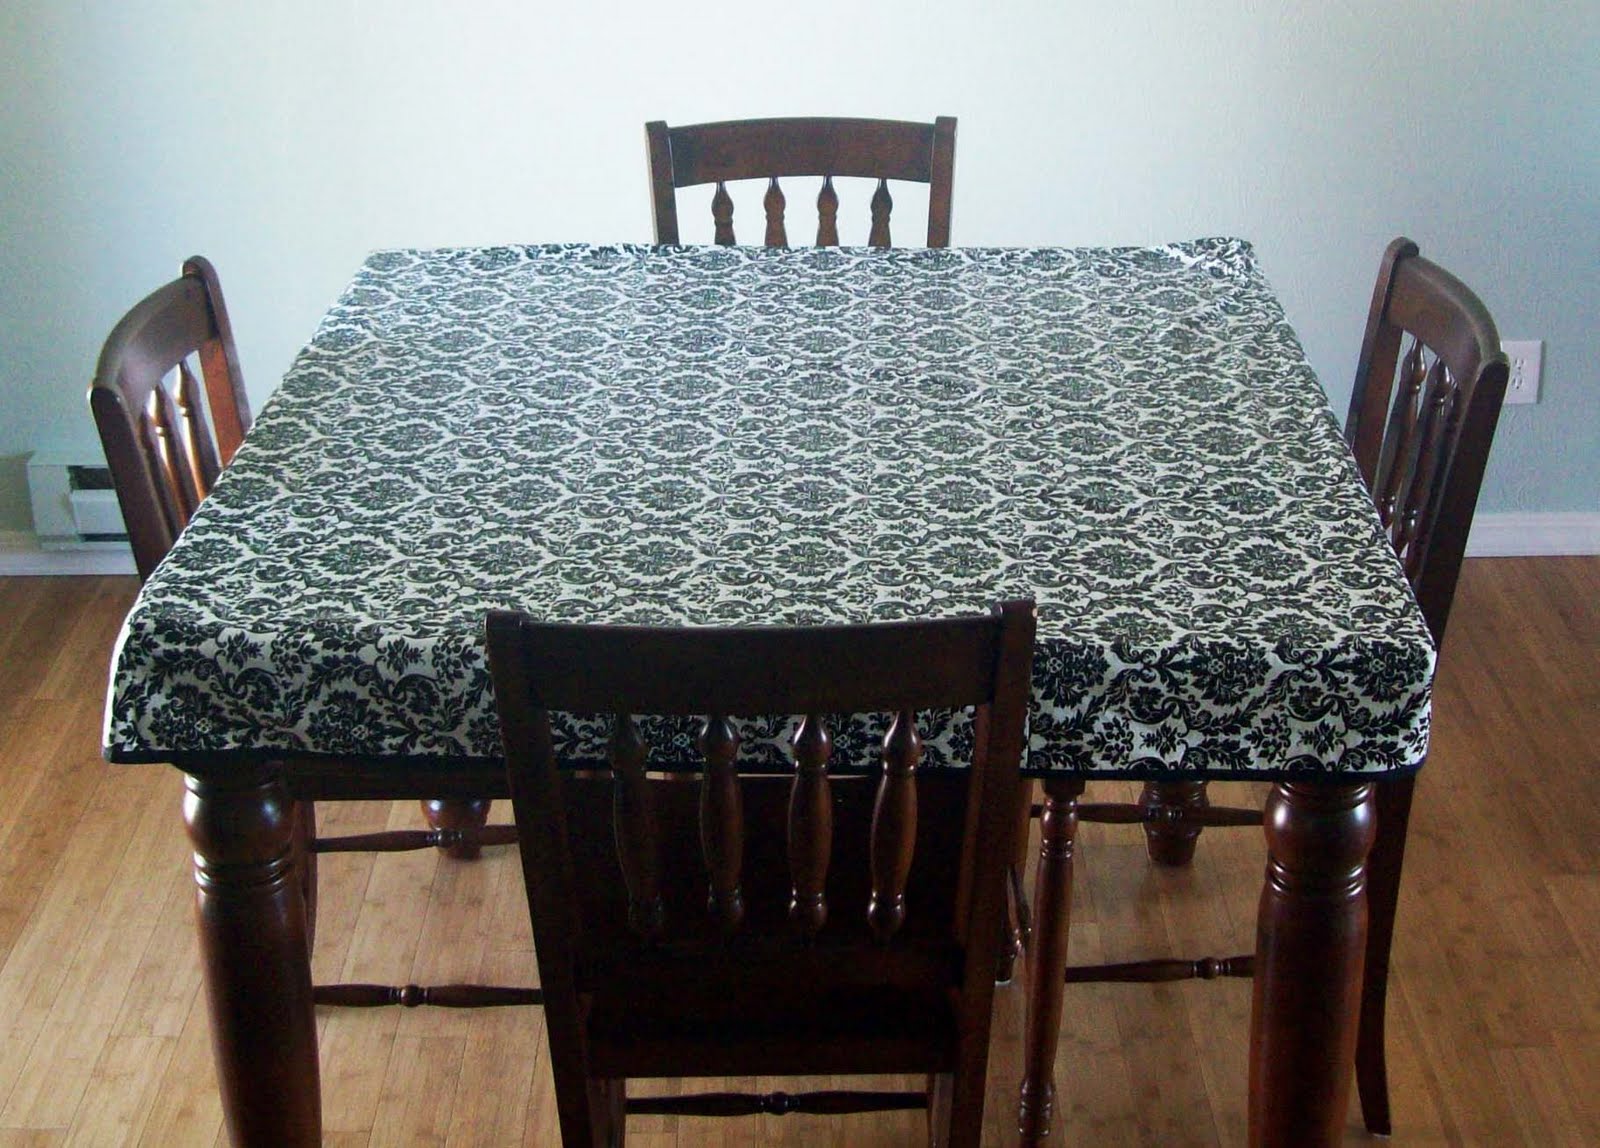 Fitted Tablecloths For Dining Room Tables